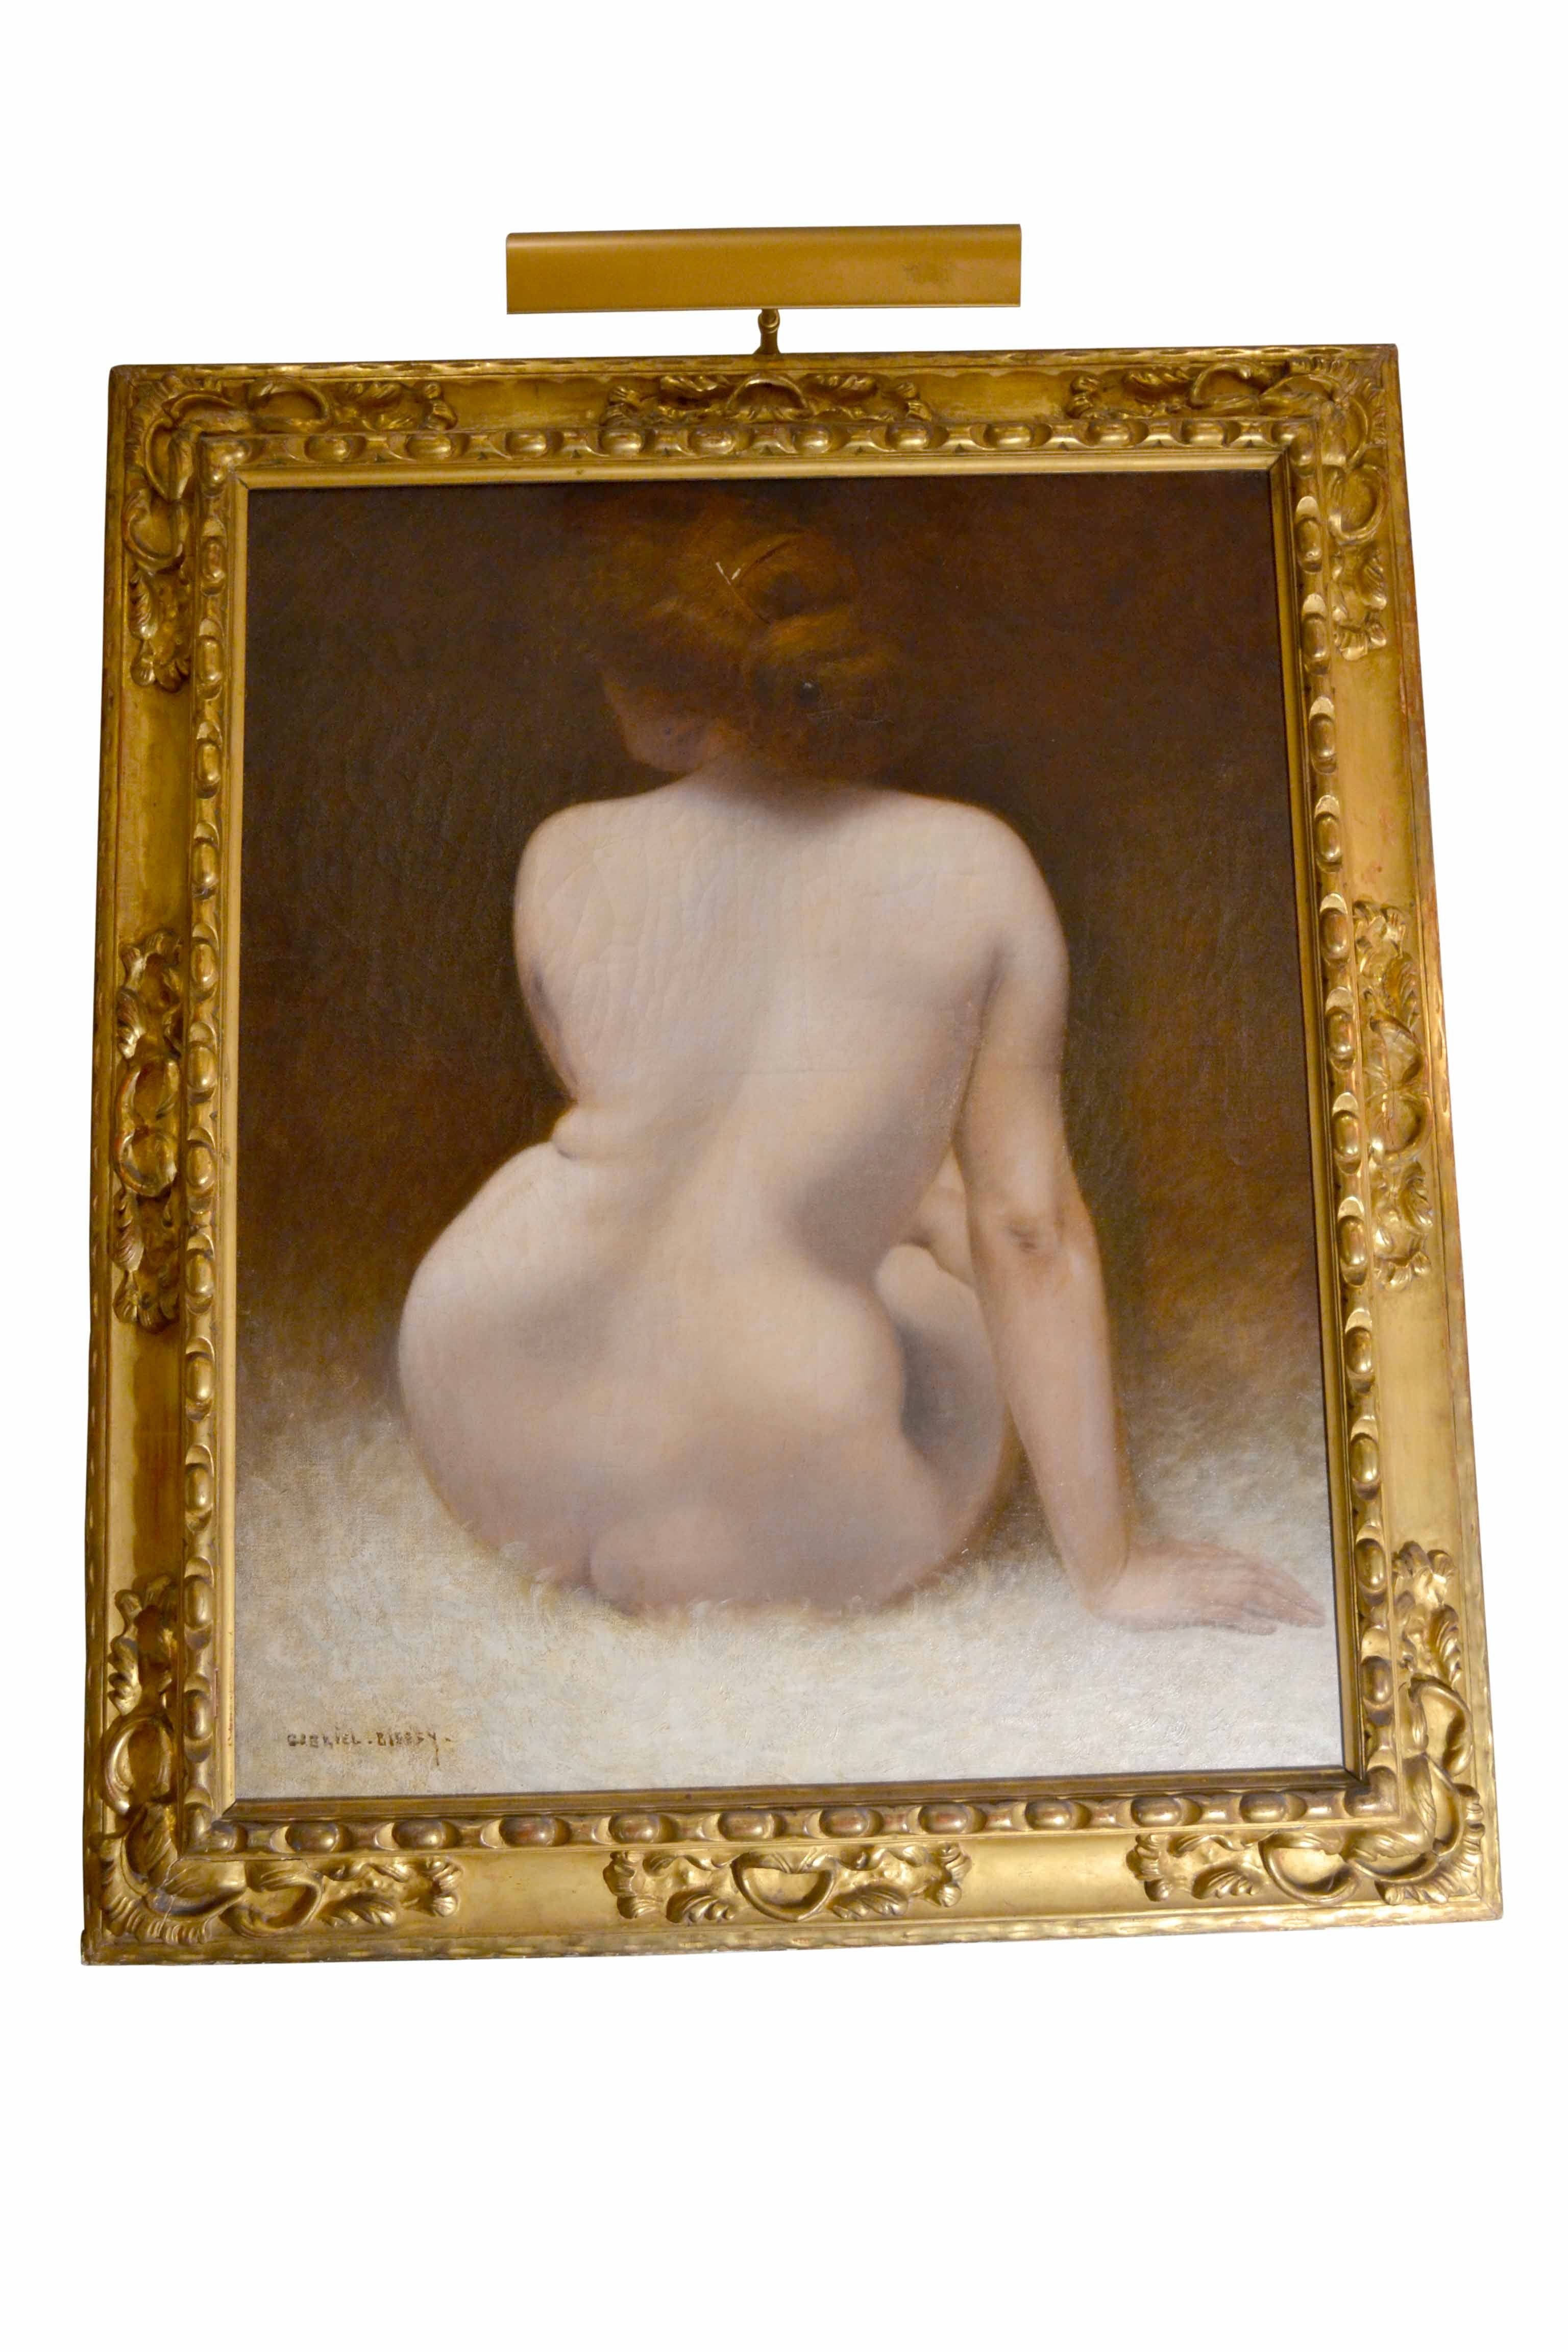 Large Original Oil Painting Of A Female Nude By French Artist Gabriel Biessy